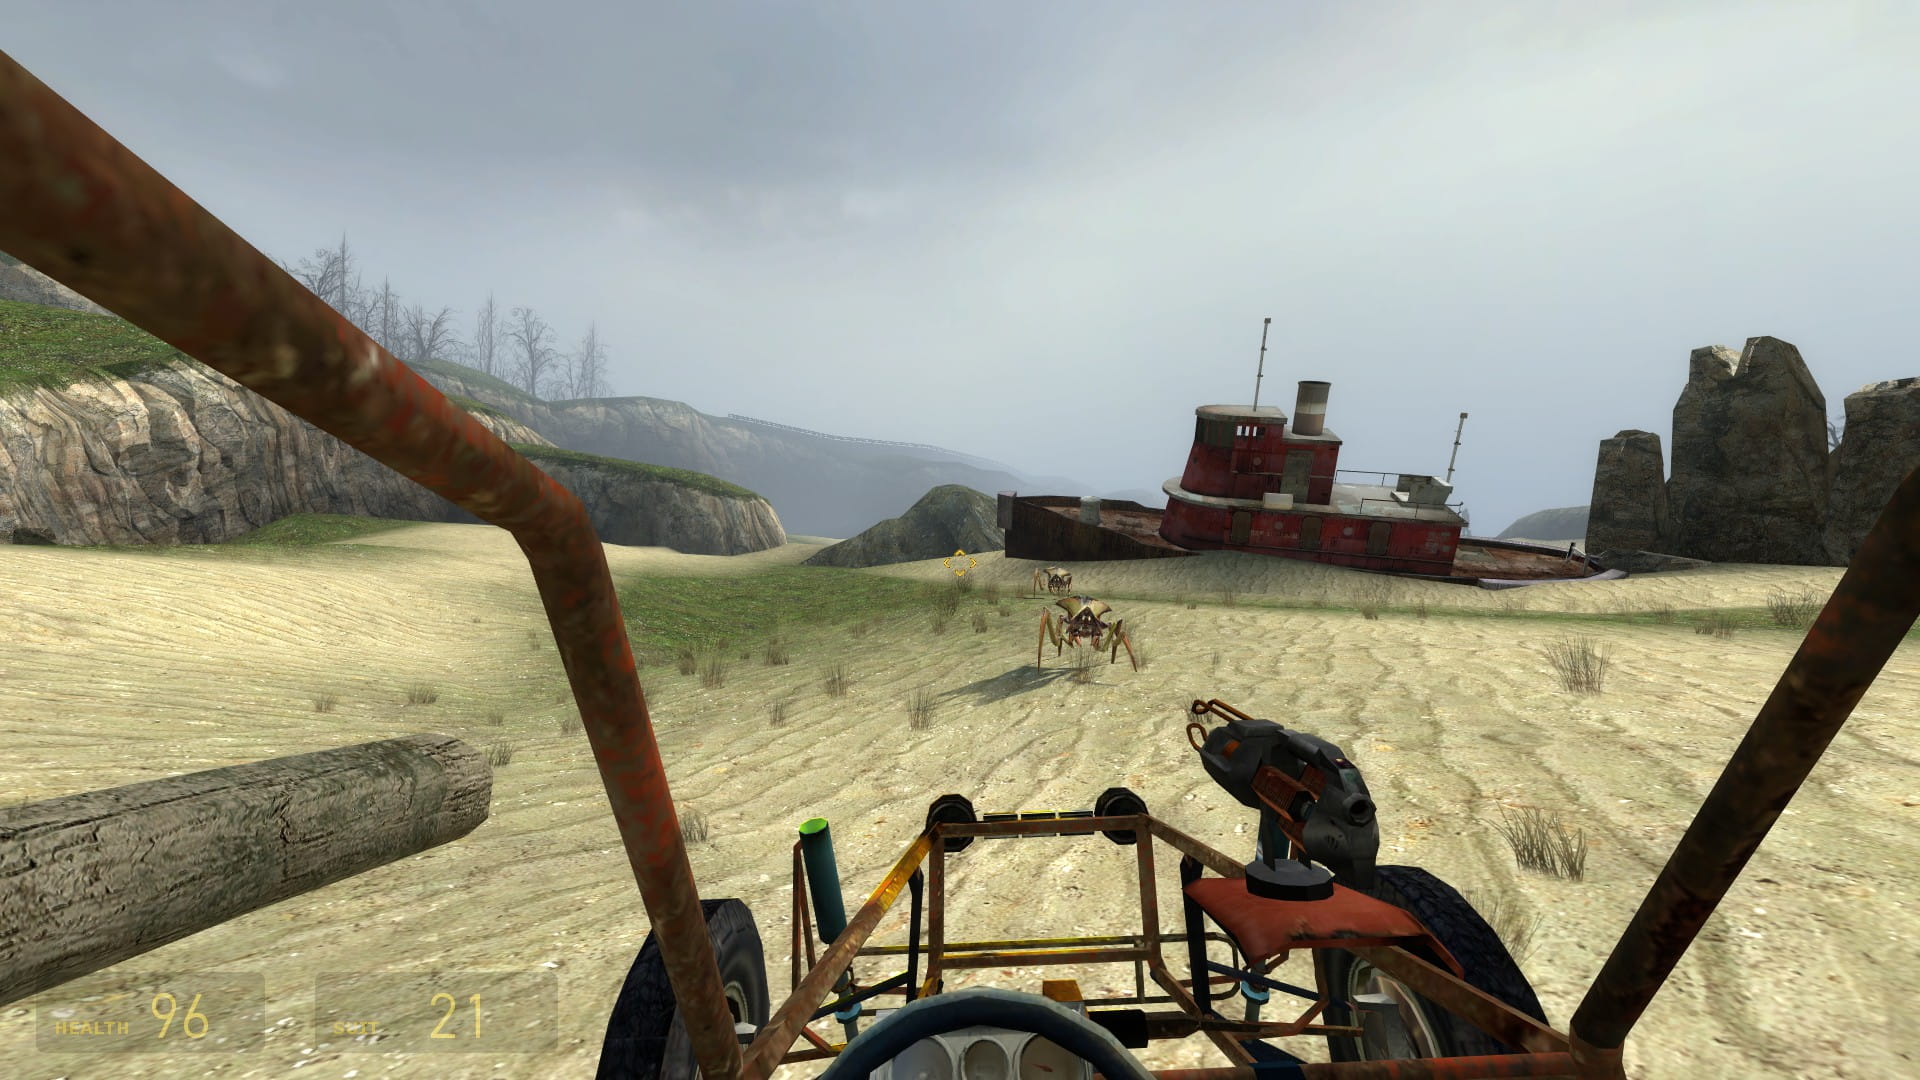 A screenshot from Half-Life 2. The player drives a buggy through the coast as antlions approach. In the background, an old ship stranded on land can be seen.